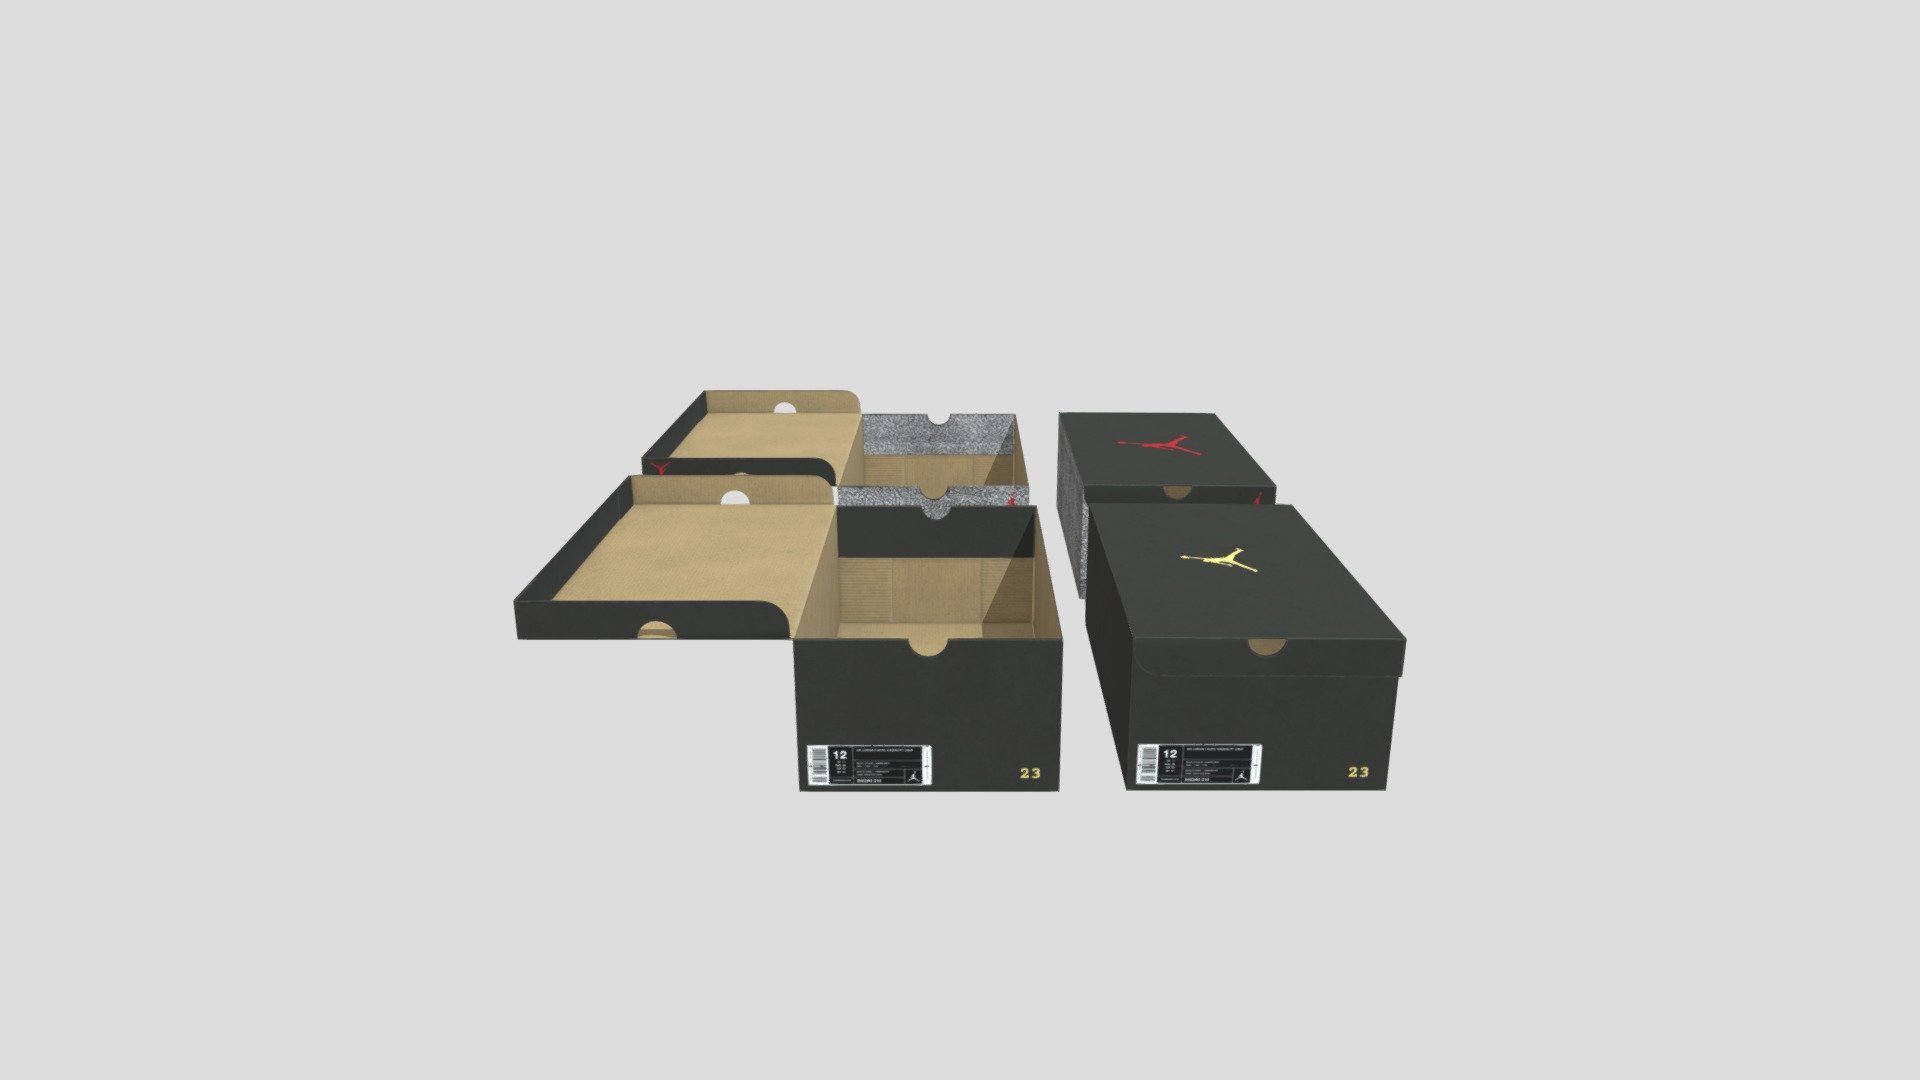 This Jordans Shoe Box set Contains:

4 Meshes (2 open, 2 Closed)

3, 4K Textures

Jordans Black 4K Textures
Jordans Elephant Print 4K Textures
Cardboard 4K Textures
Each mesh is 808 vertices and UV Unwrapped for future texturing 3d model